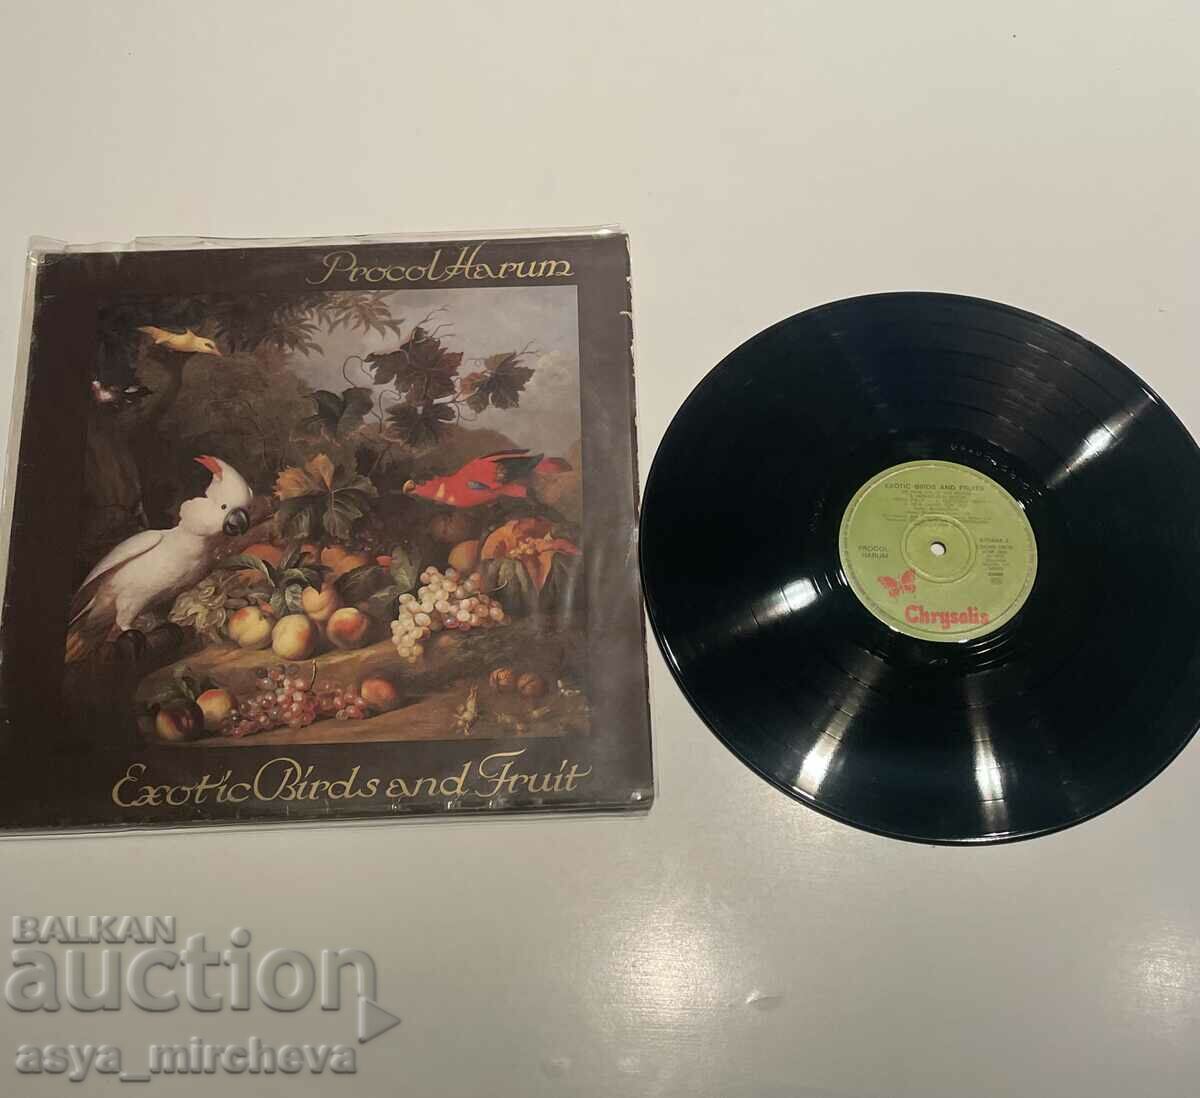 Speaker record by Procol Harum - Exotic birds and fruits